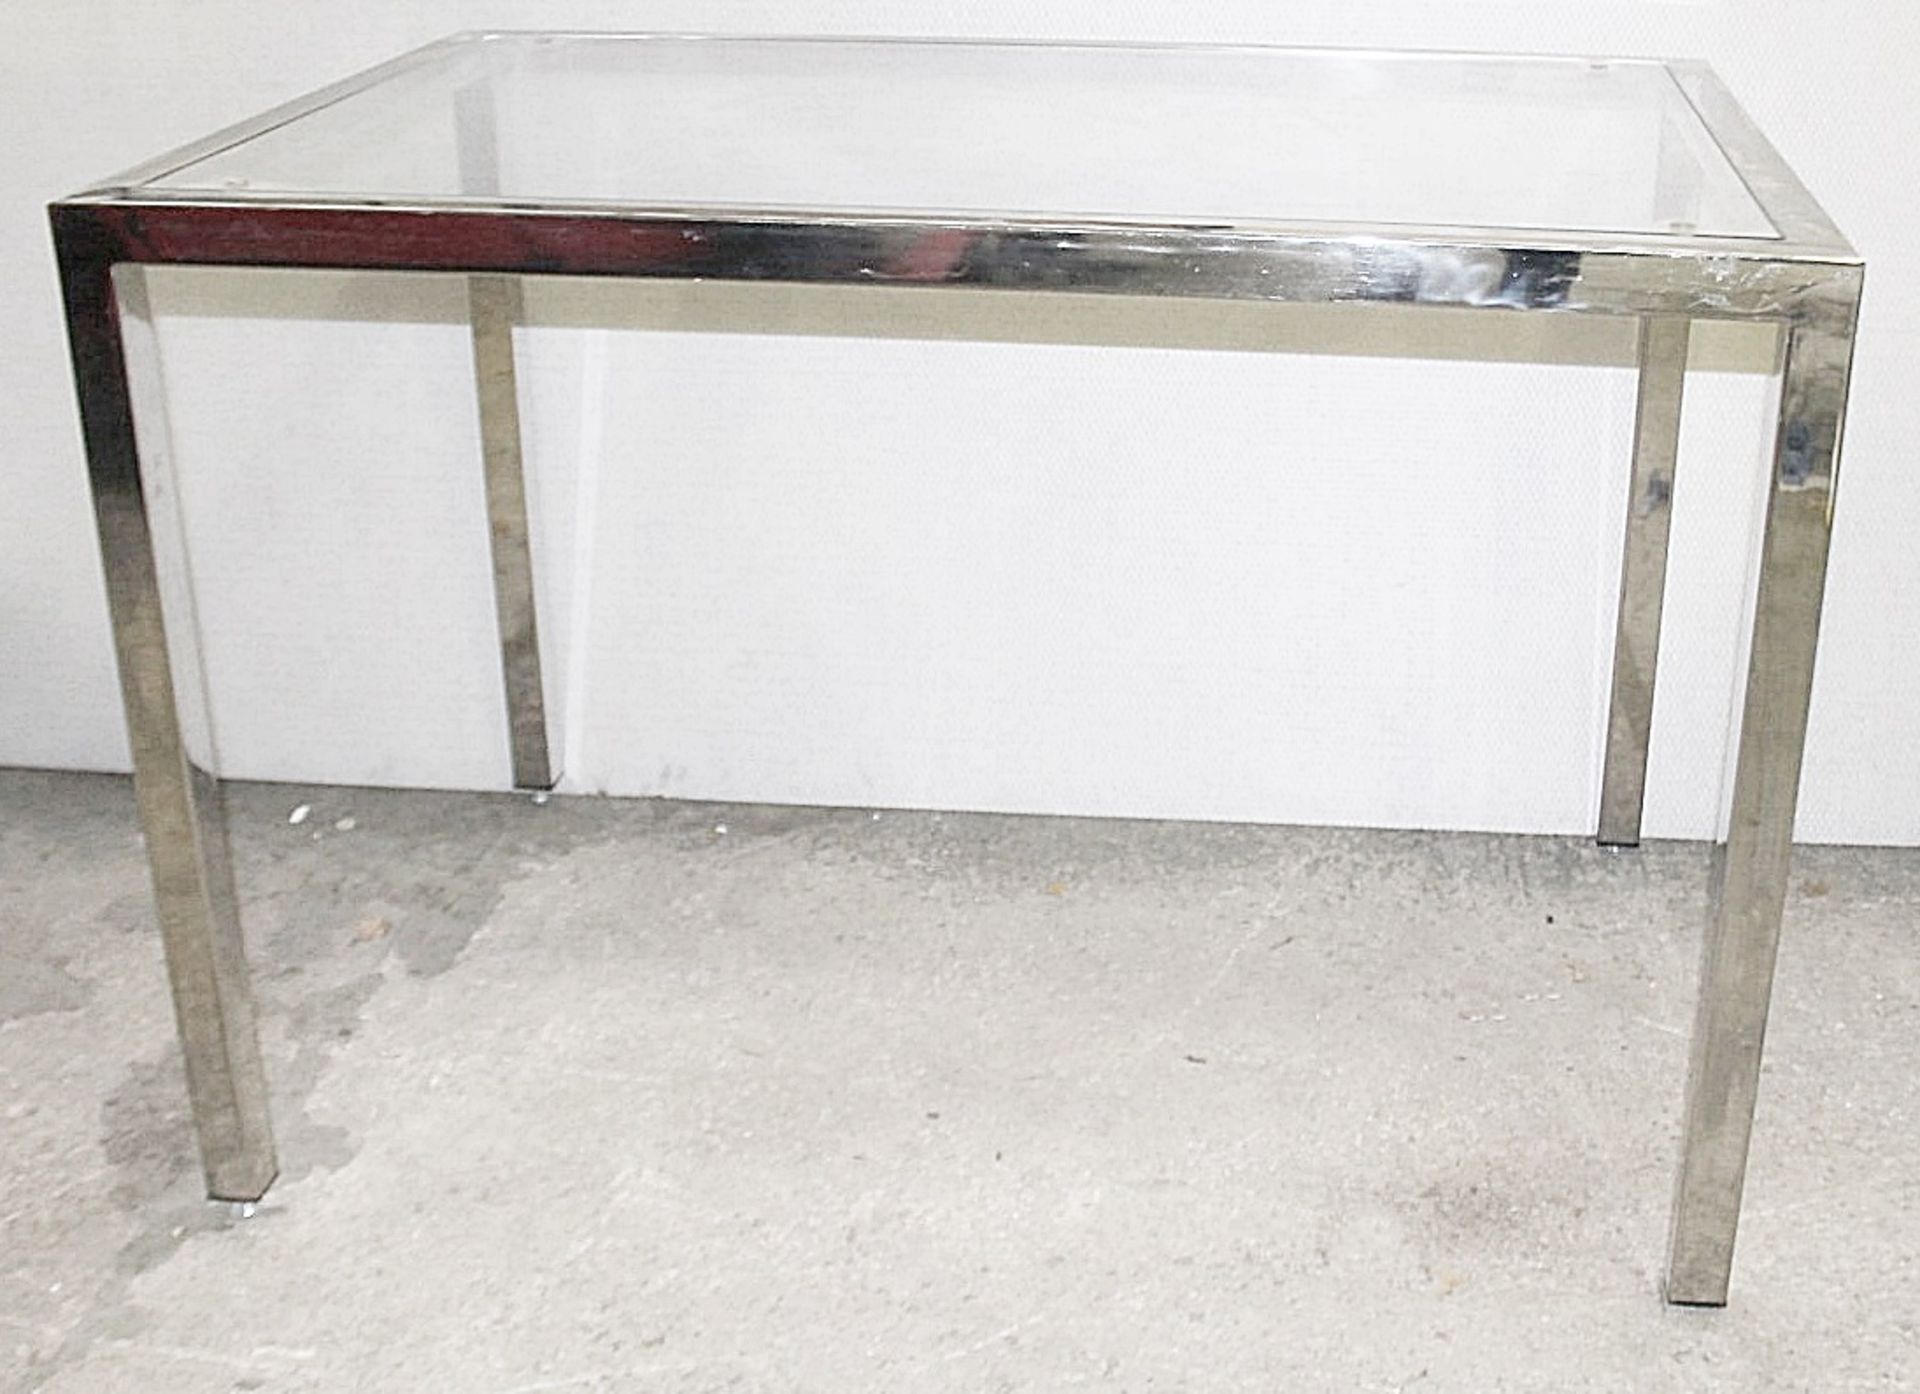 1 x Large Display Table In Glass And Chrome - Dimensions: H91 x W135 x D90cm - Ex-Showroom Piece - - Image 2 of 6